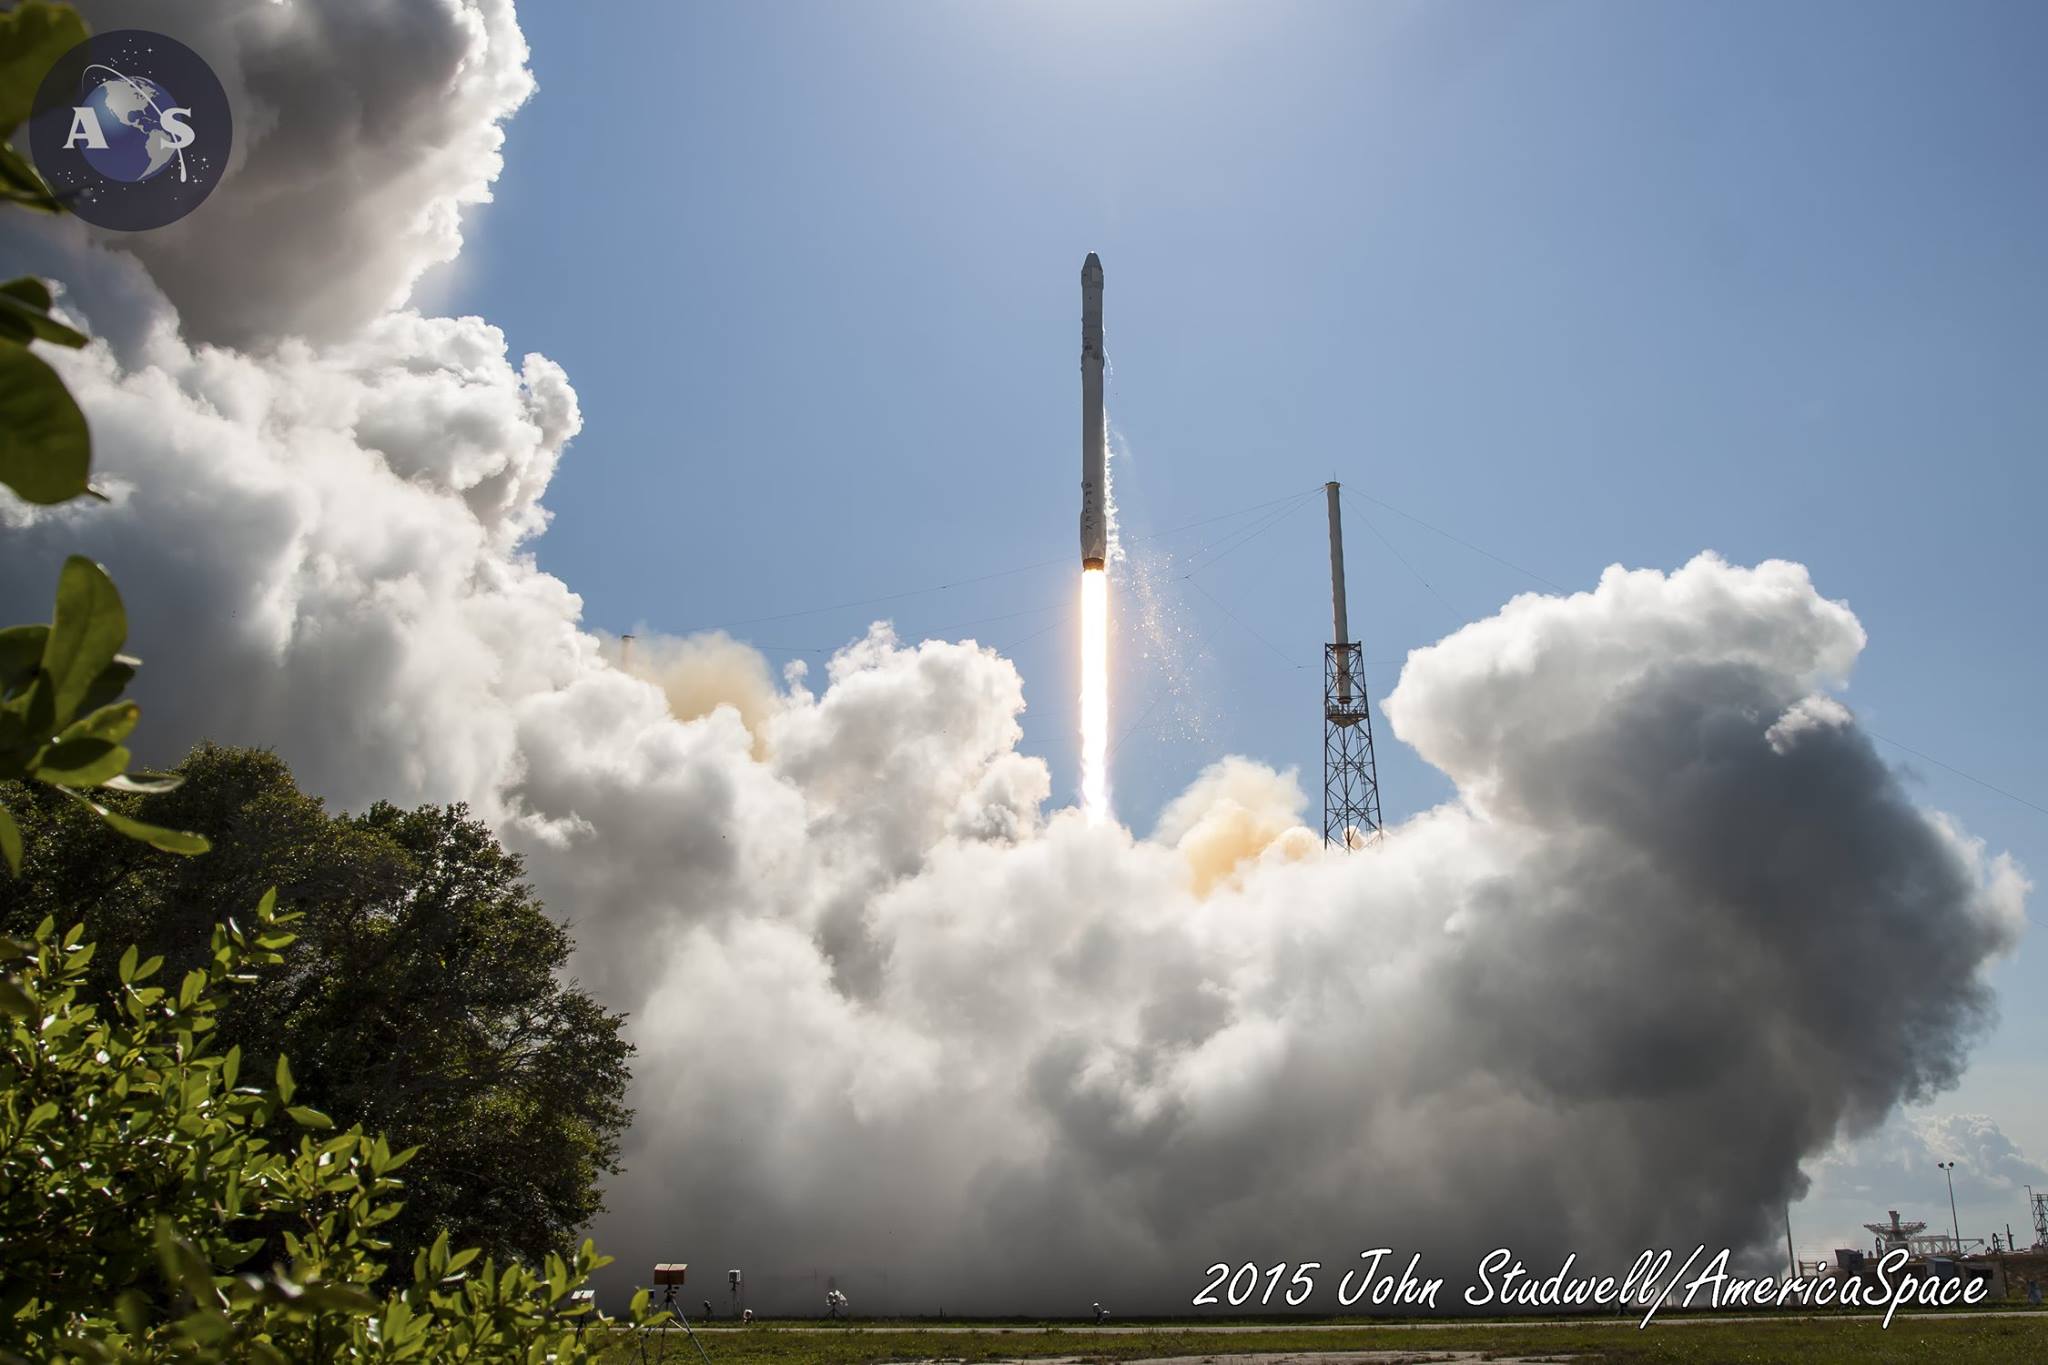 Liftoff of SpaceX CRS-6 mission to the ISS for NASA. Photo Credit: John Studwell / AmericaSpace